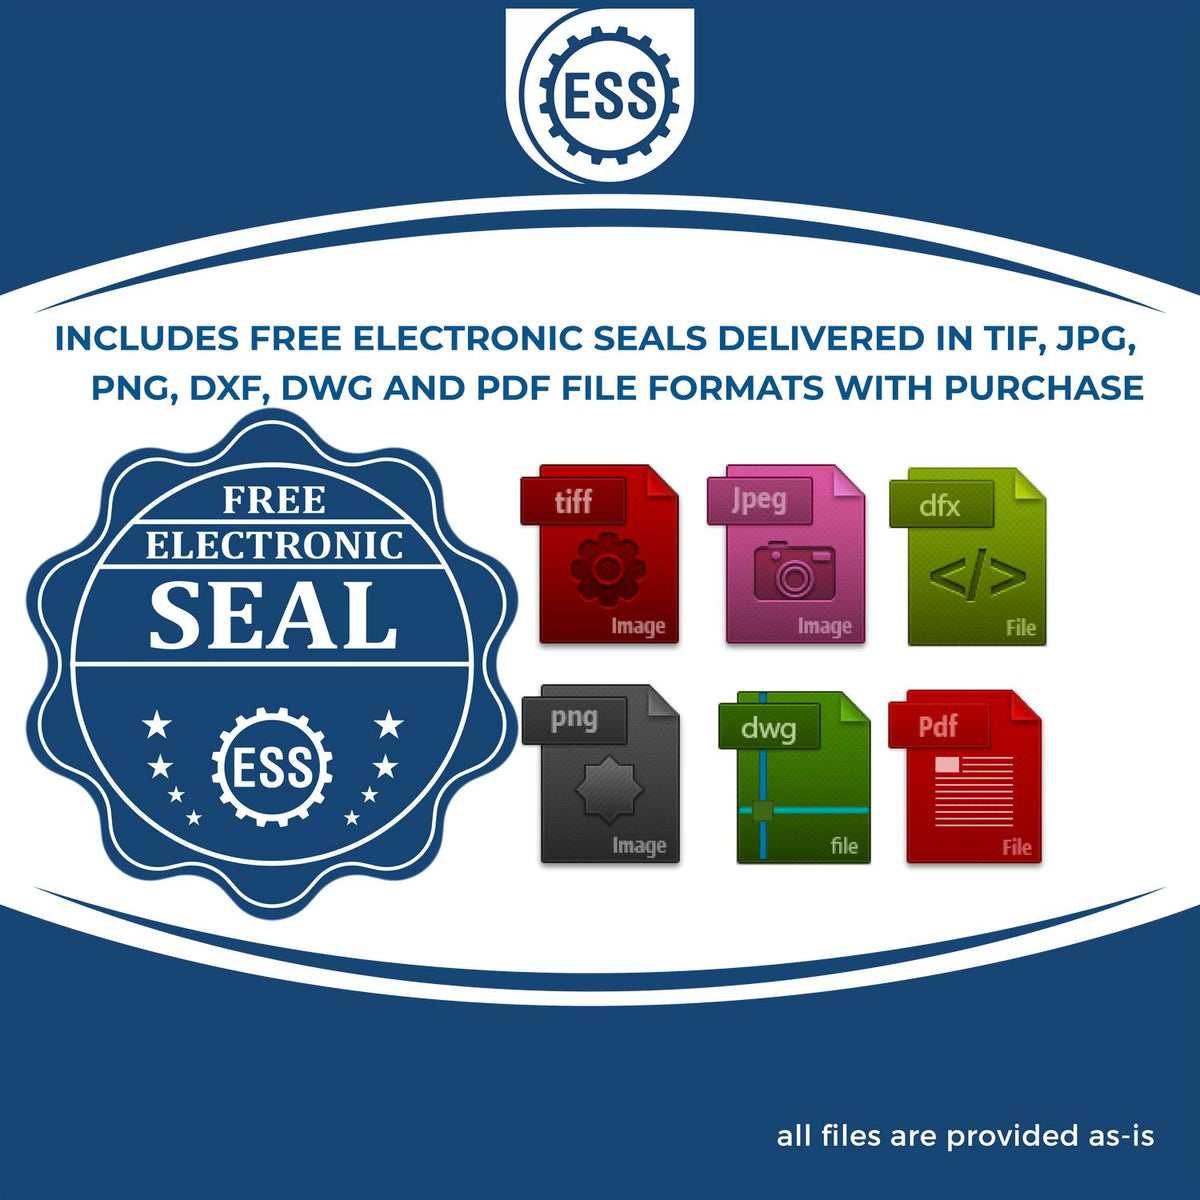 An infographic for the free electronic seal for the Premium MaxLight Pre-Inked California Engineering Stamp illustrating the different file type icons such as DXF, DWG, TIF, JPG and PNG.